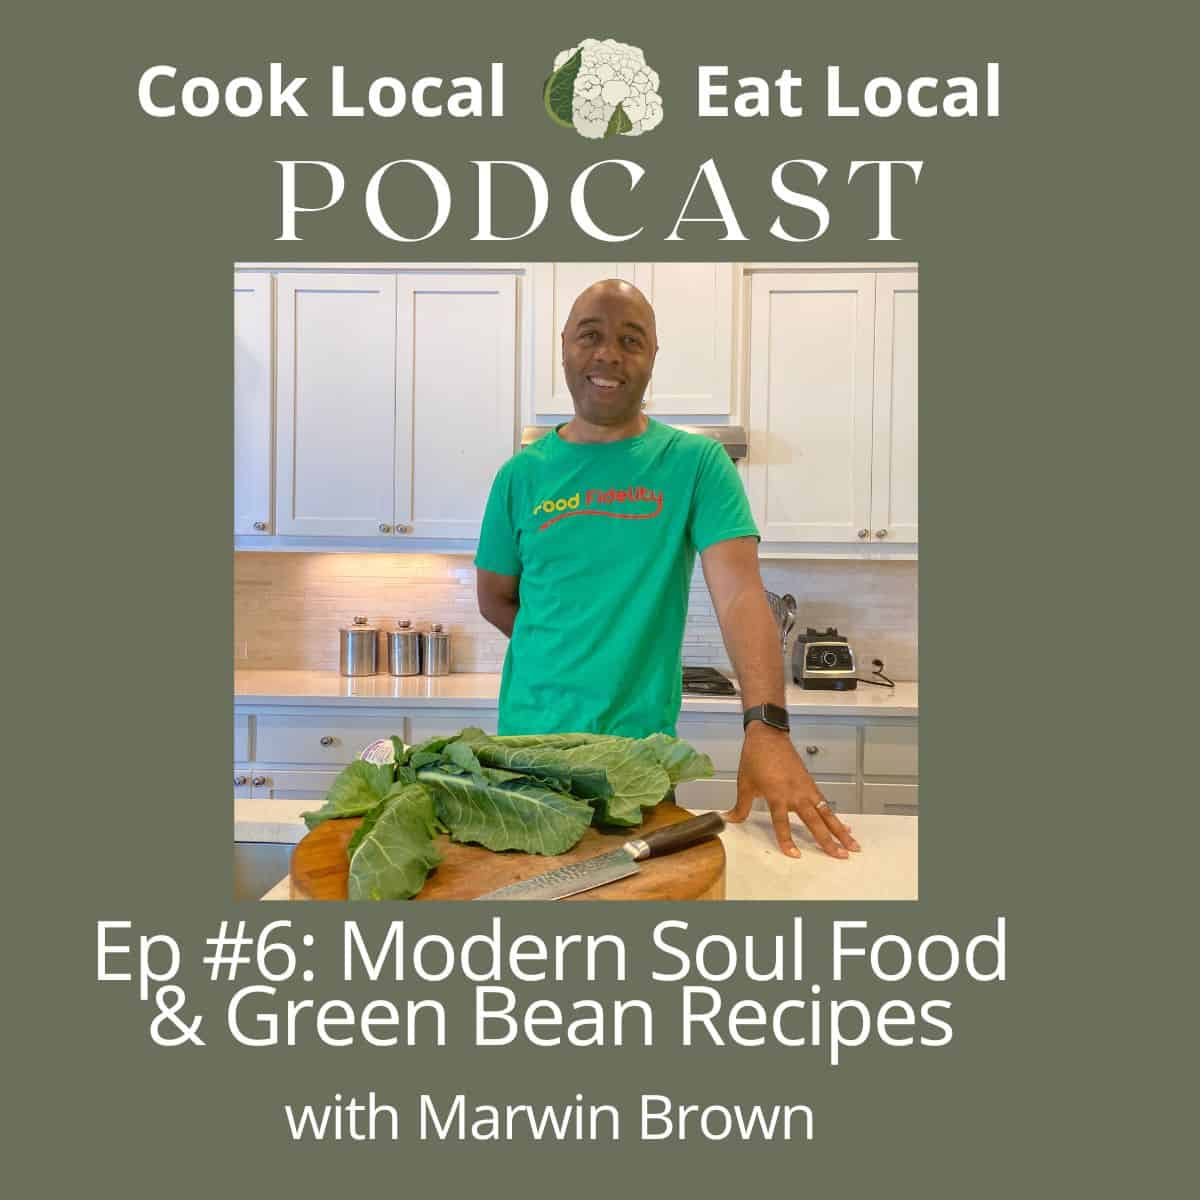 Cook Local Eat Local podcast episode cover, with a photo of guest Marwin Brown and the title underneath "Modern Soul Food and Green Been Recipes".